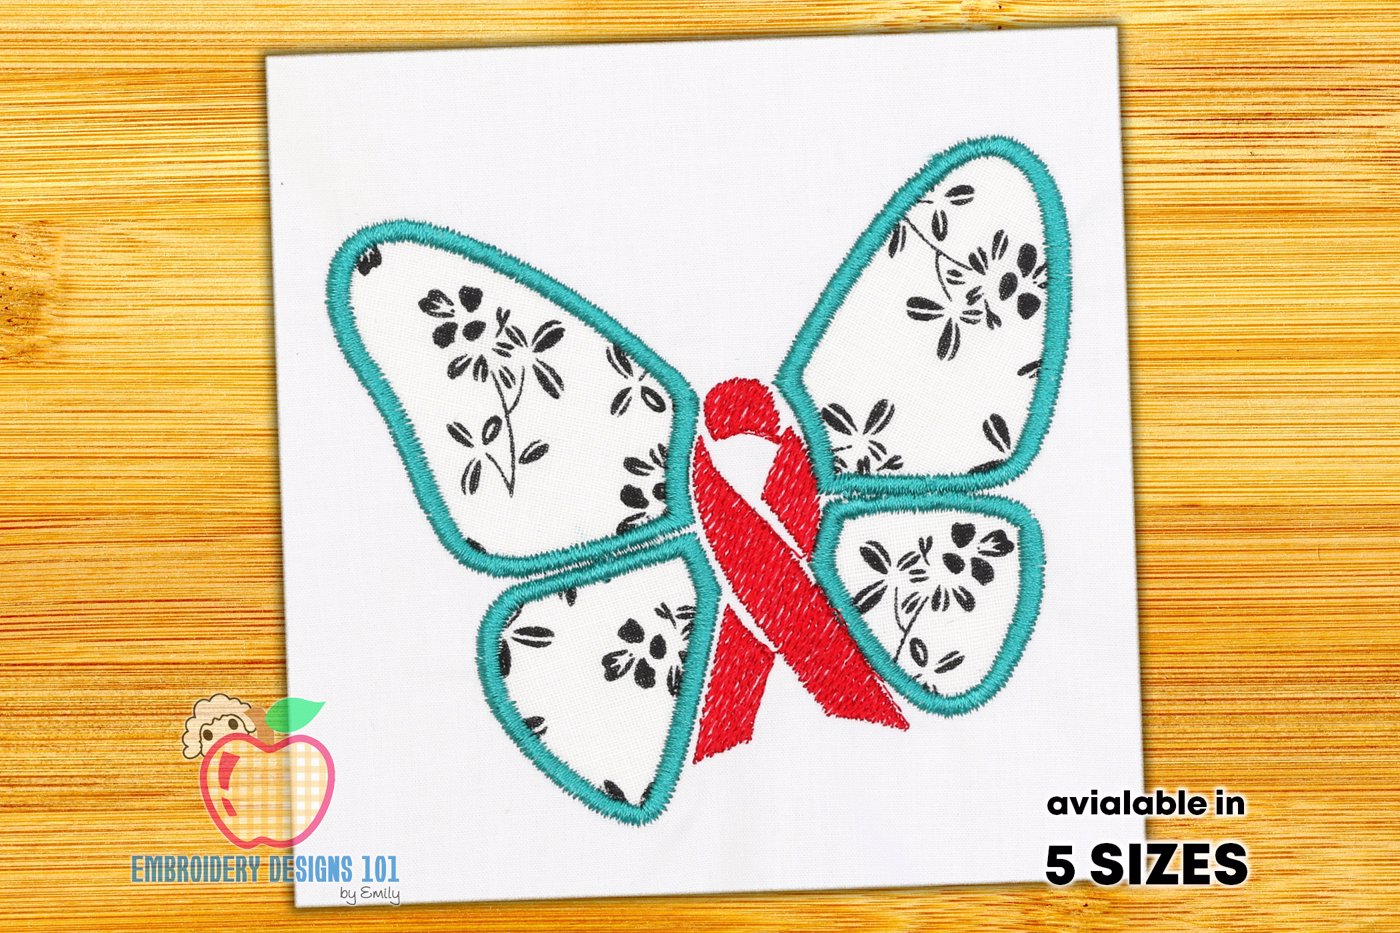 Butterfly in Brest cancer awareness ribbon applique